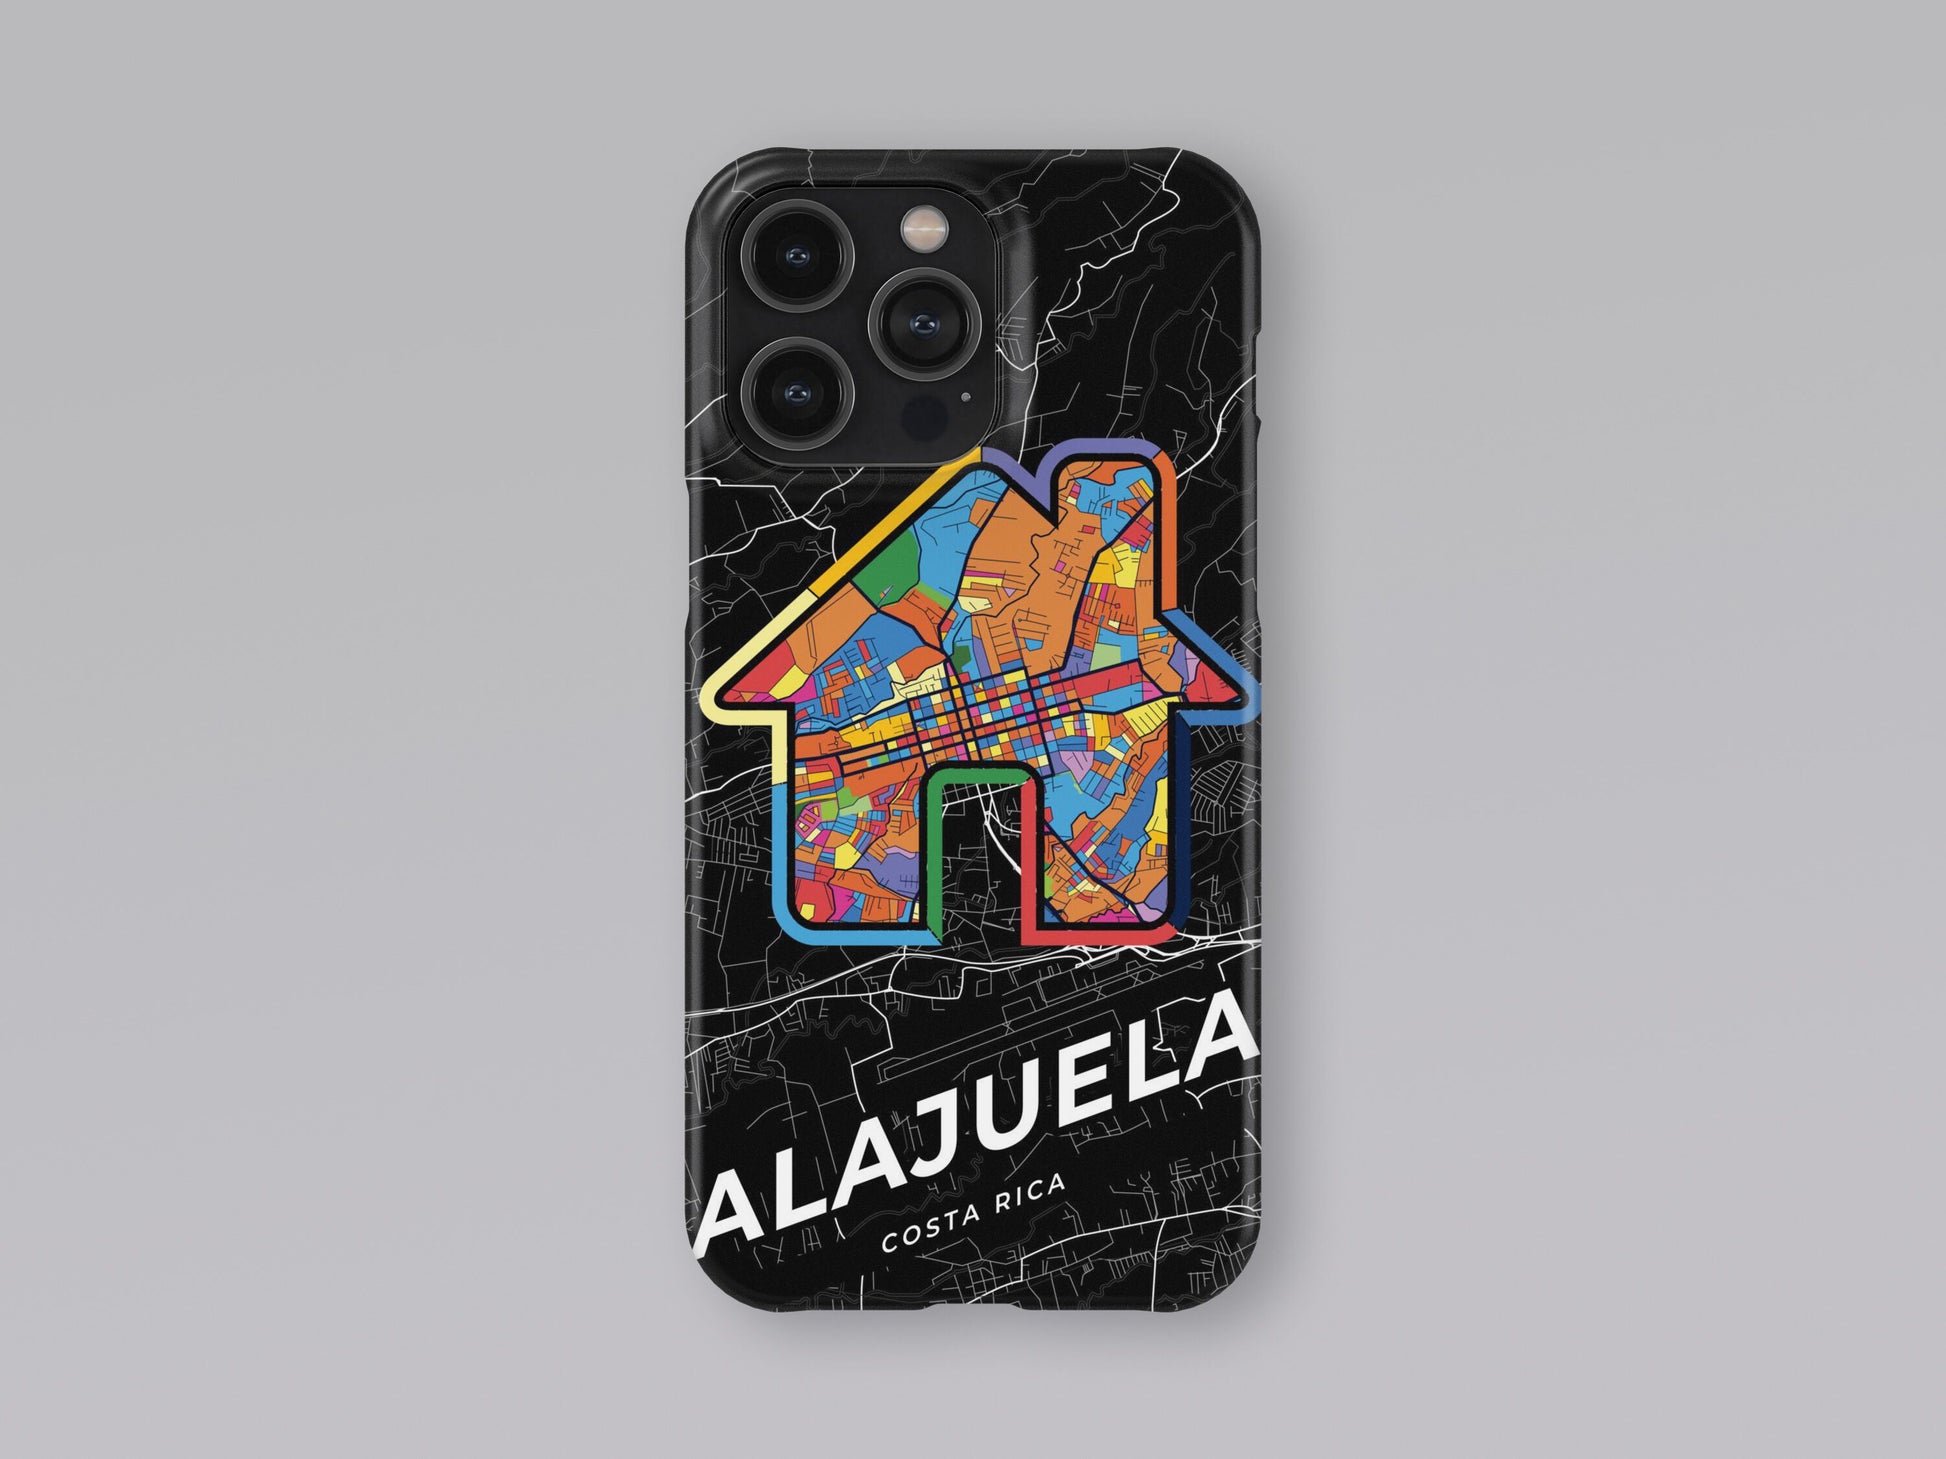 Alajuela Costa Rica slim phone case with colorful icon. Birthday, wedding or housewarming gift. Couple match cases. 3